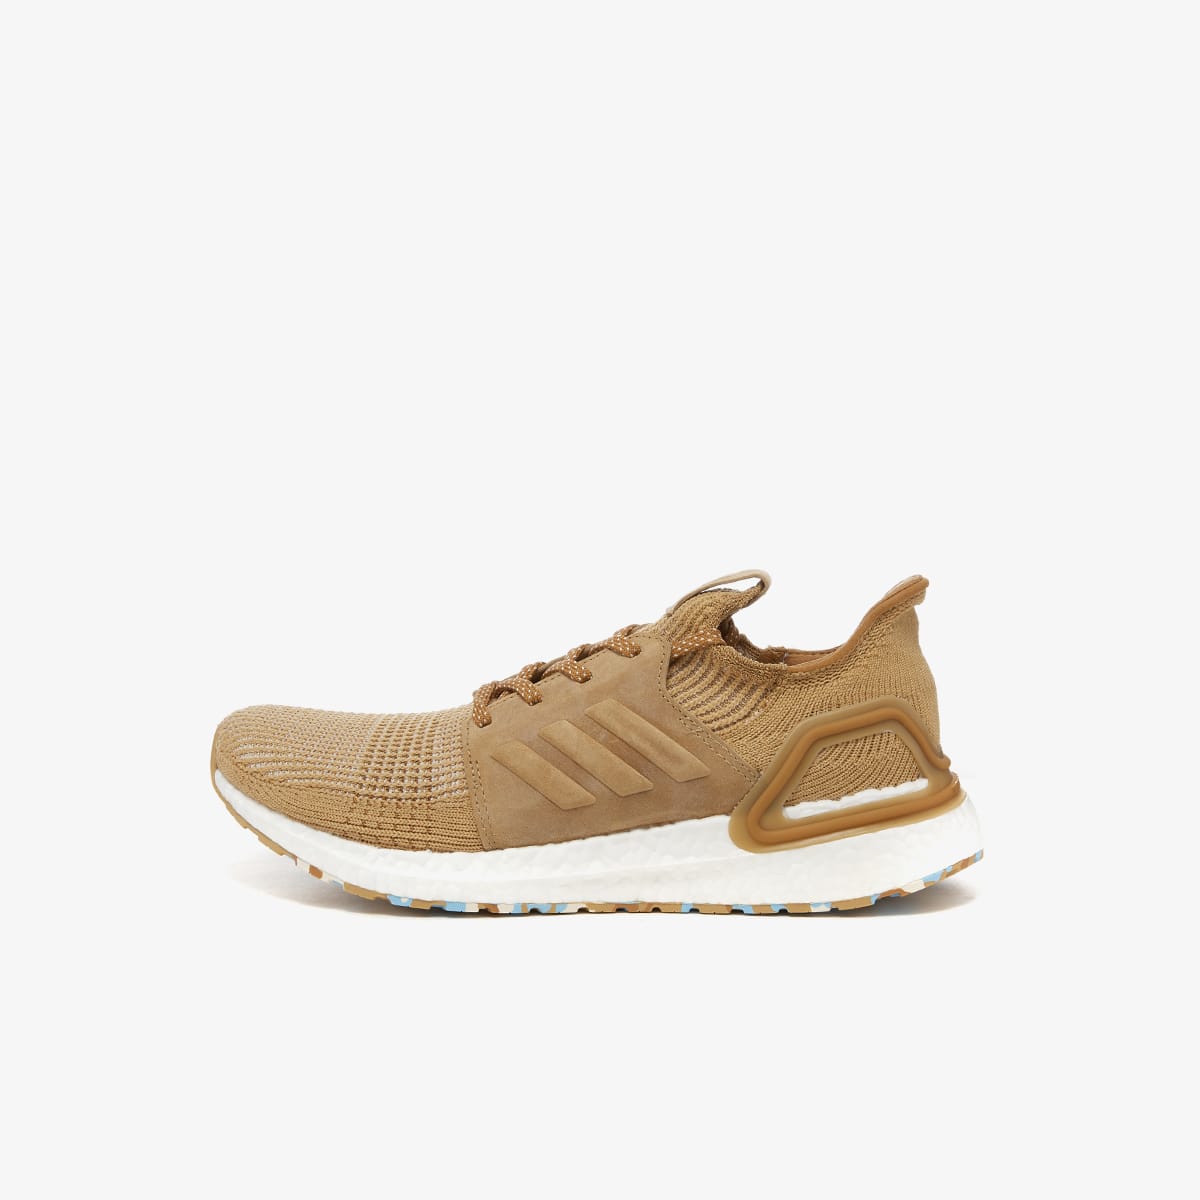 Adidas x Universal Works Ultraboost (Praire Sand & Cumin) | END. Launches